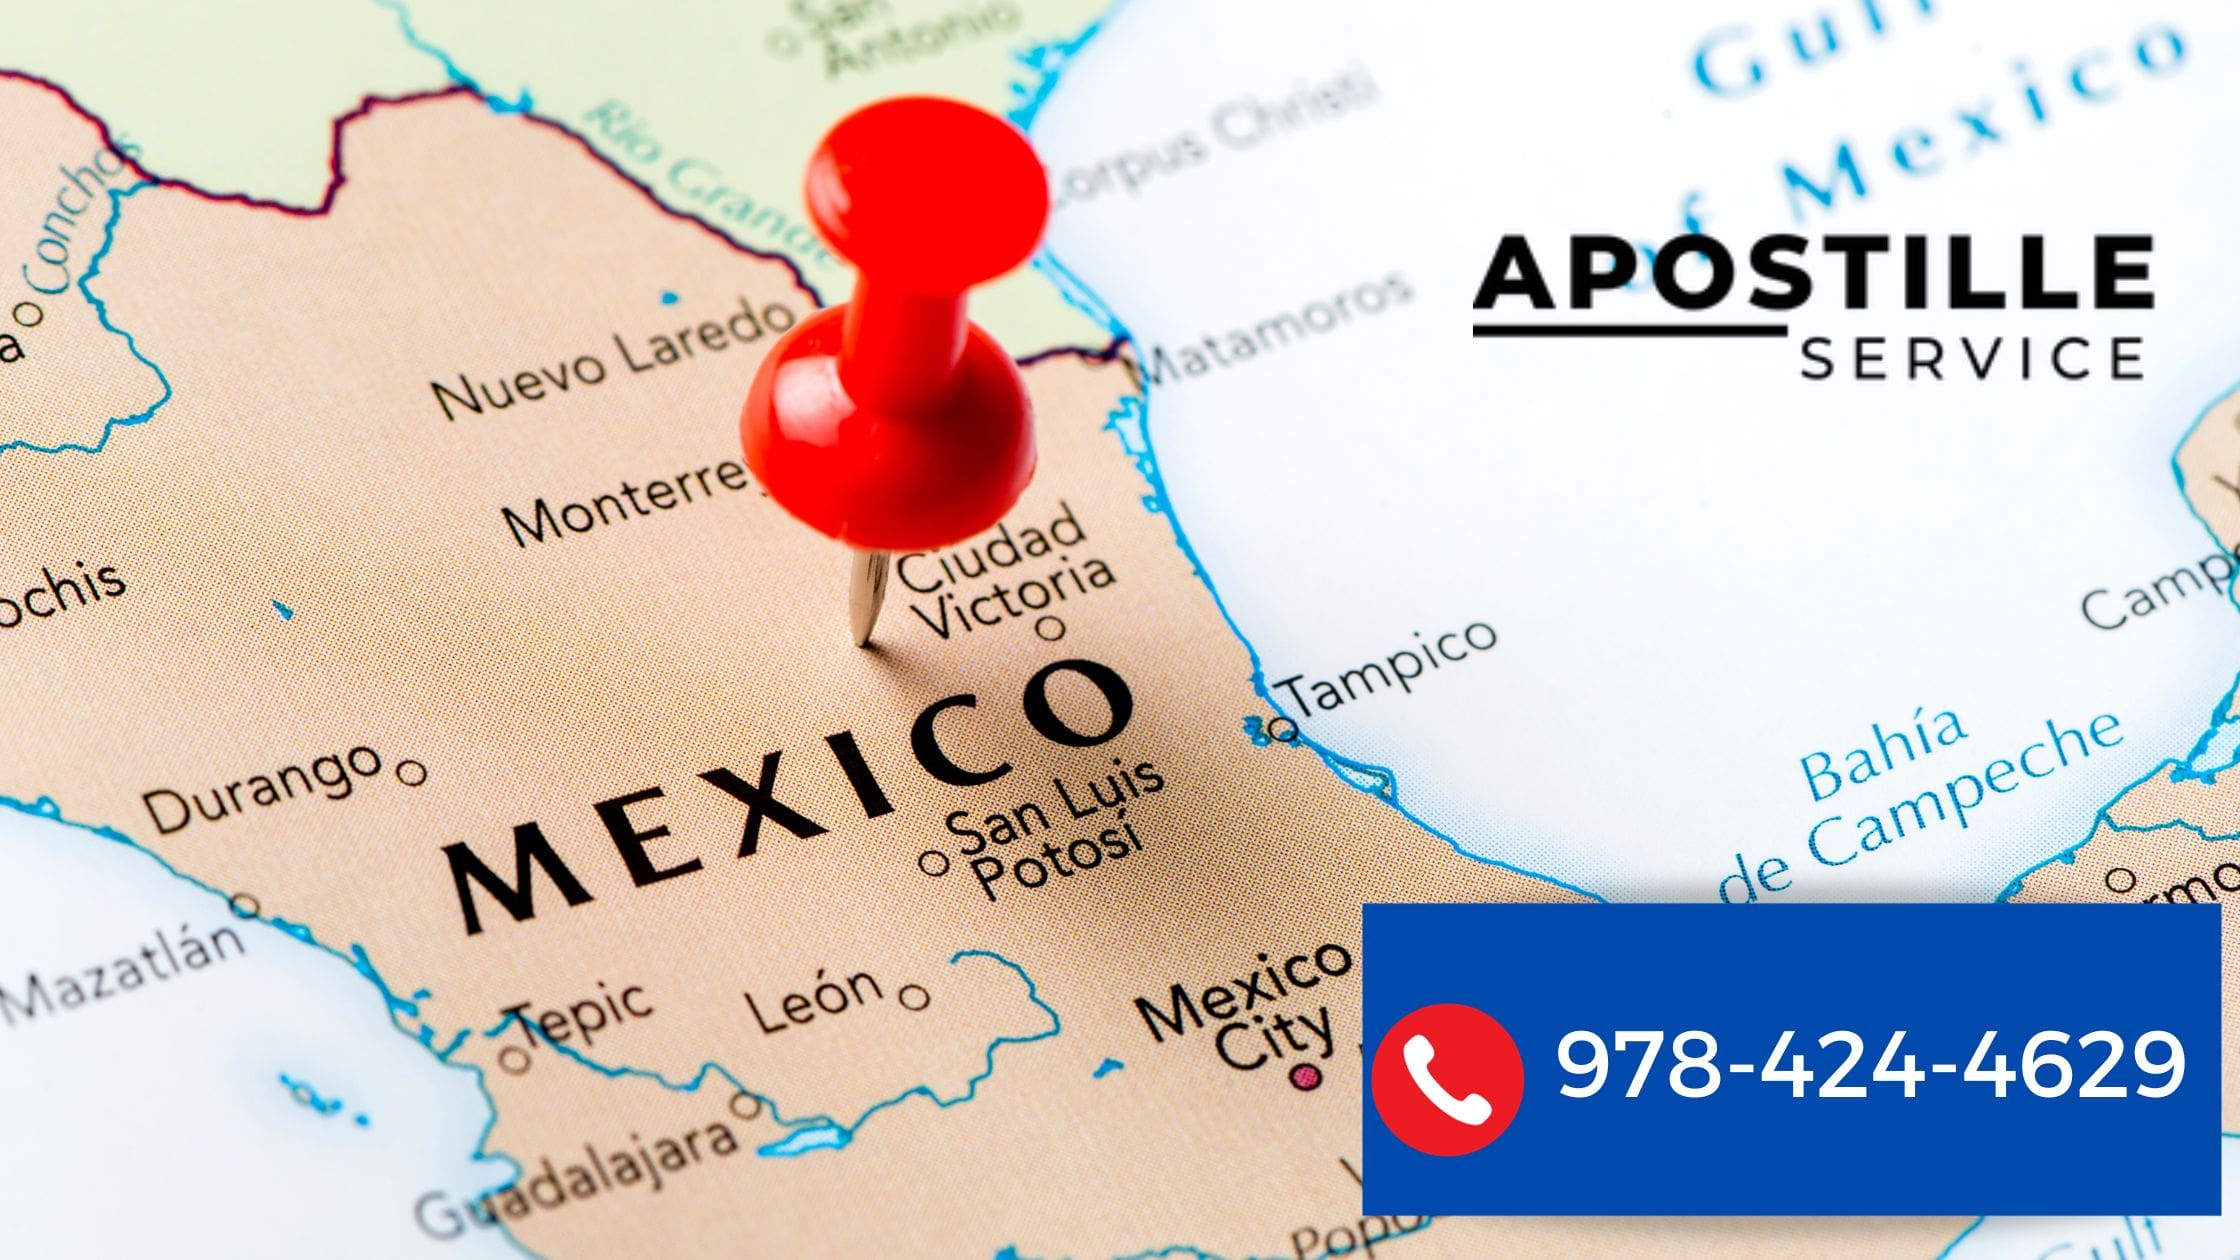 Apostille Service To Mexico From Boston MA